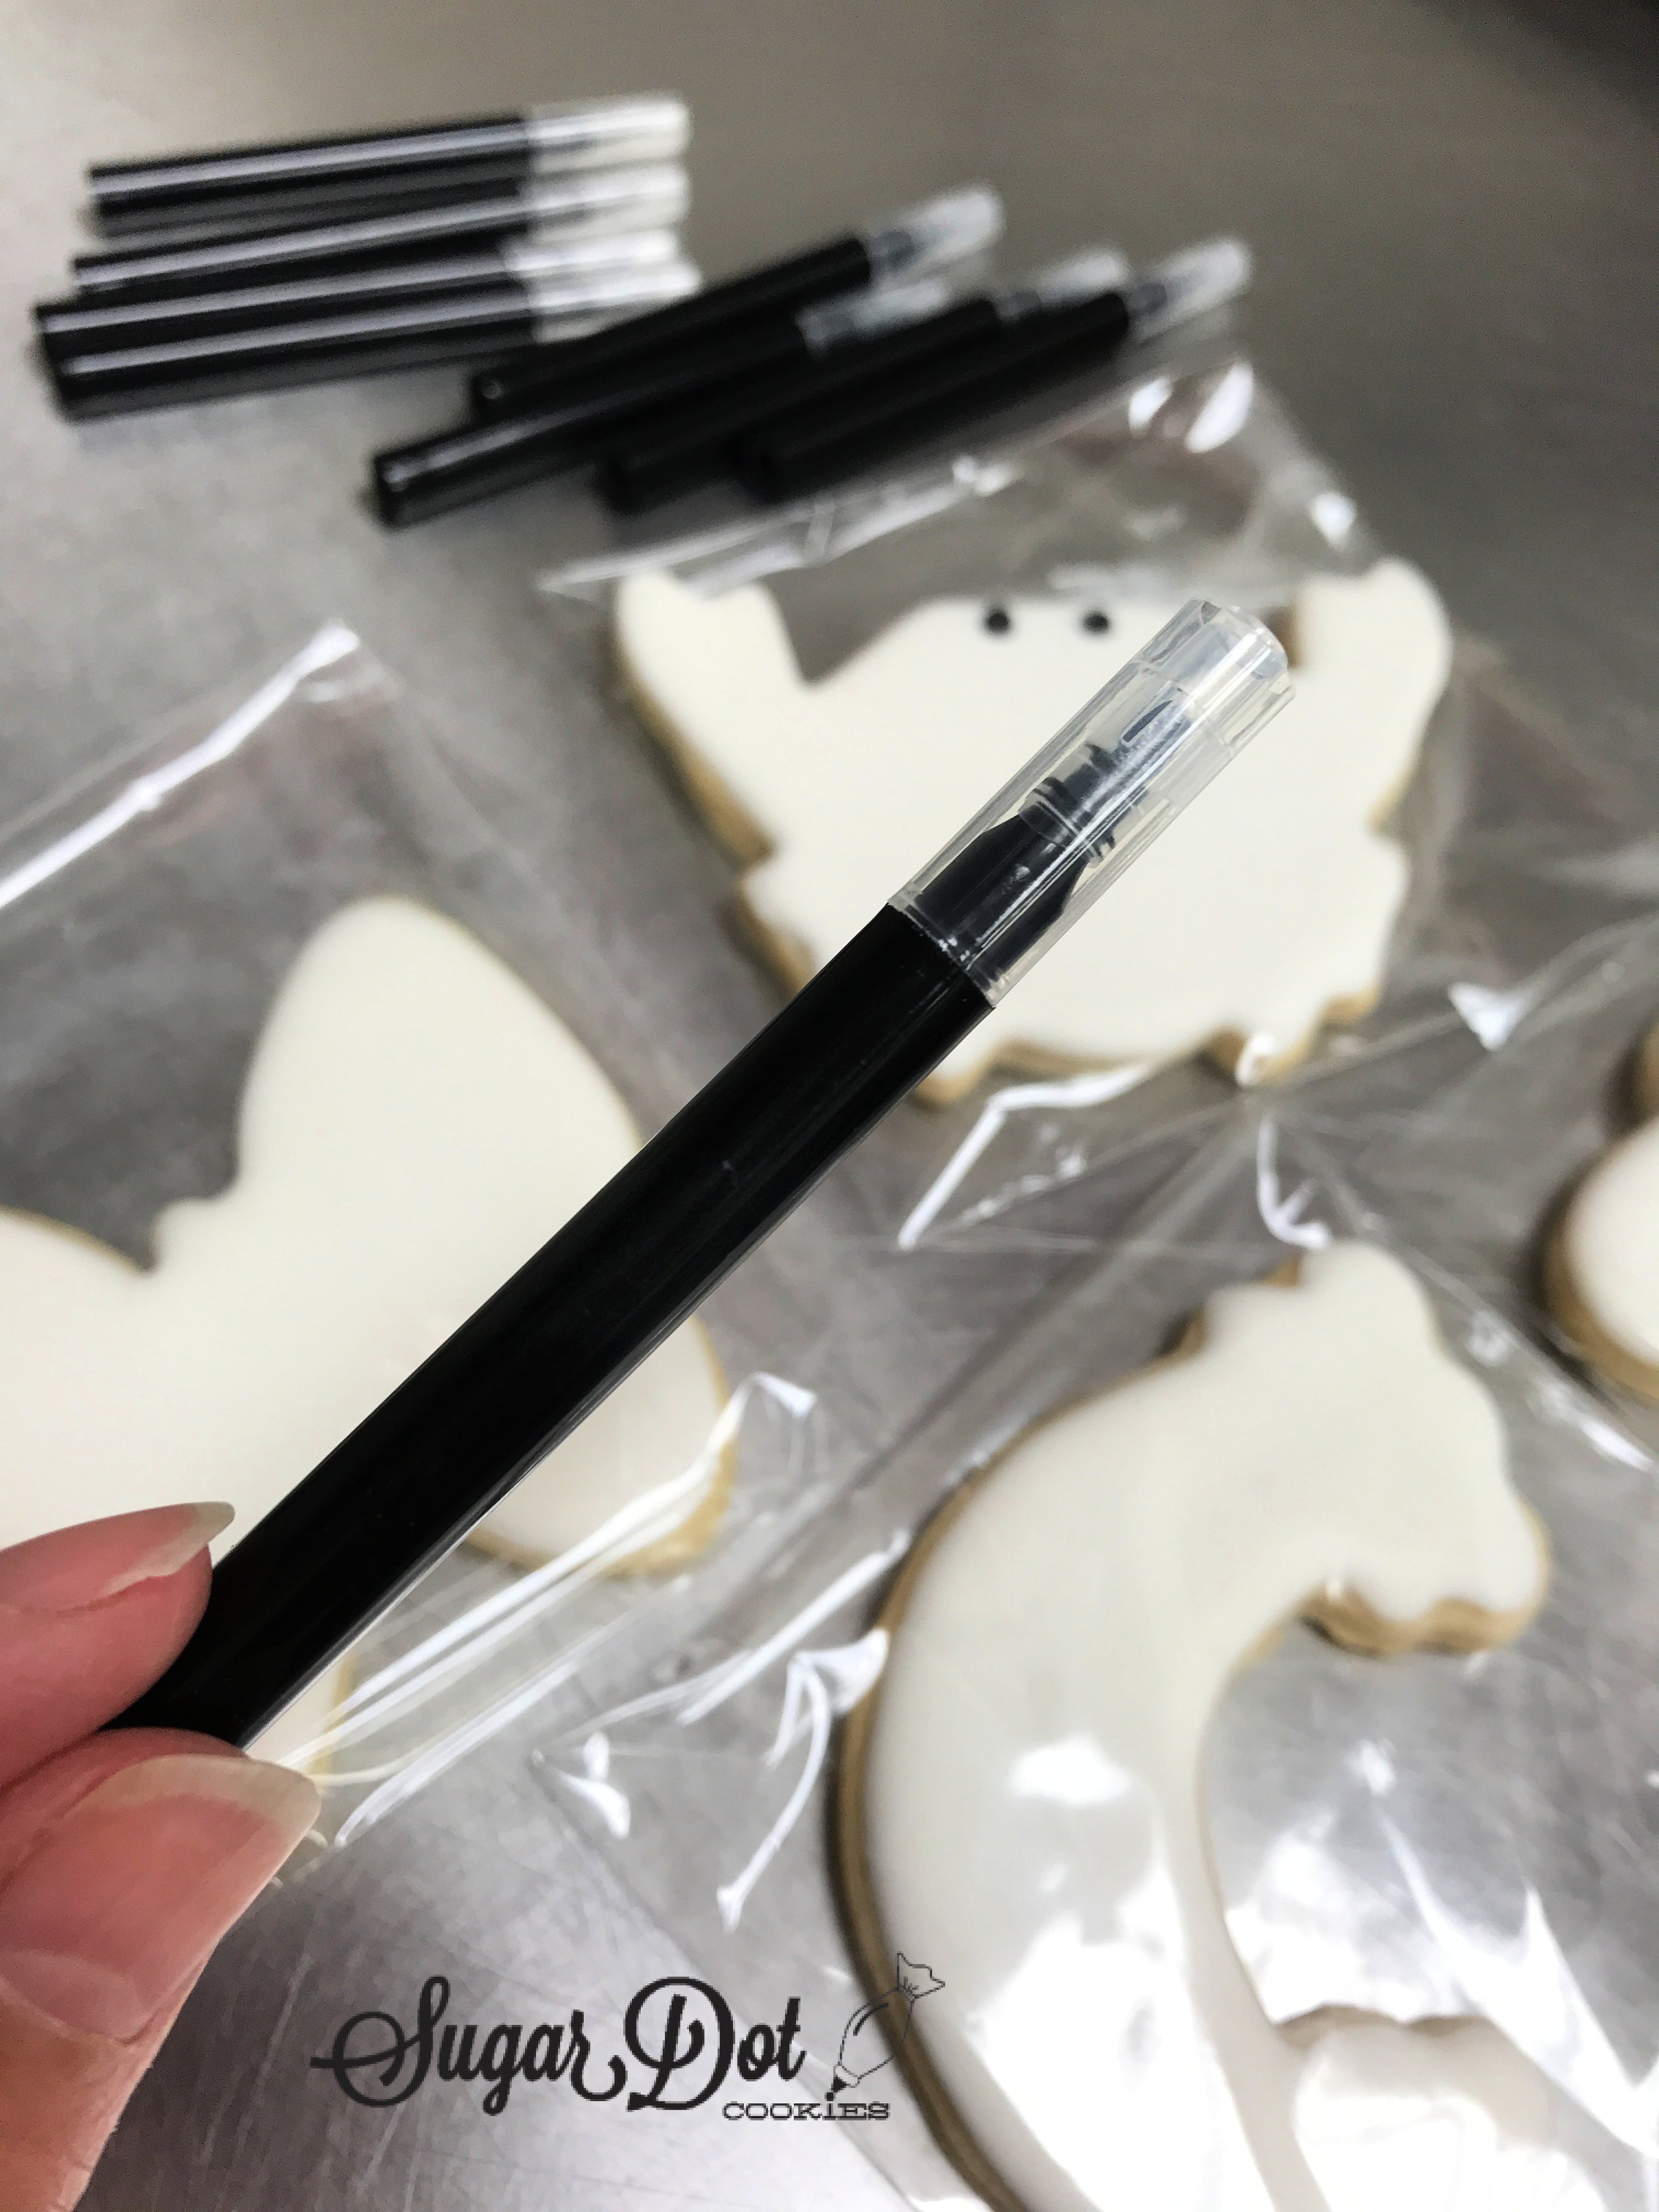 Mini Black Edible Markers for cookies and cakes - royal icing